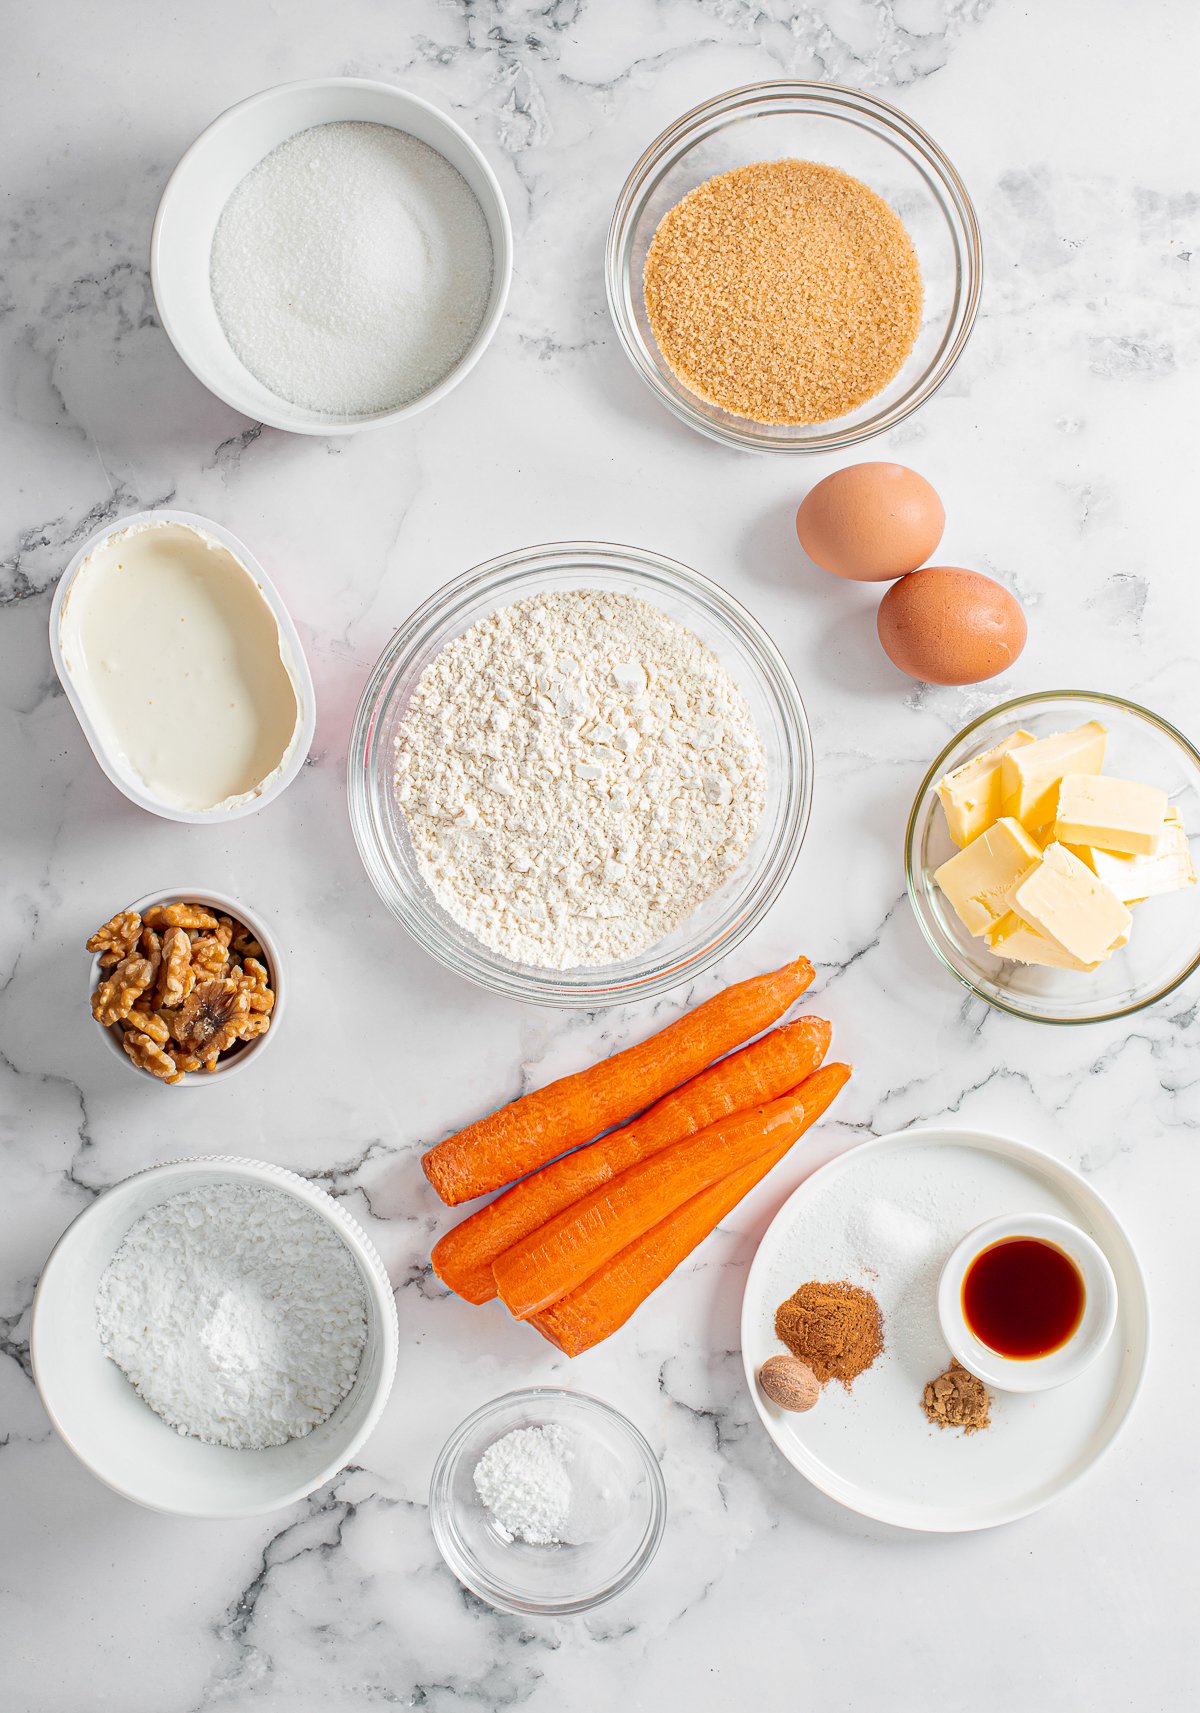 Ingredients needed to make a Carrot Loaf Cake.